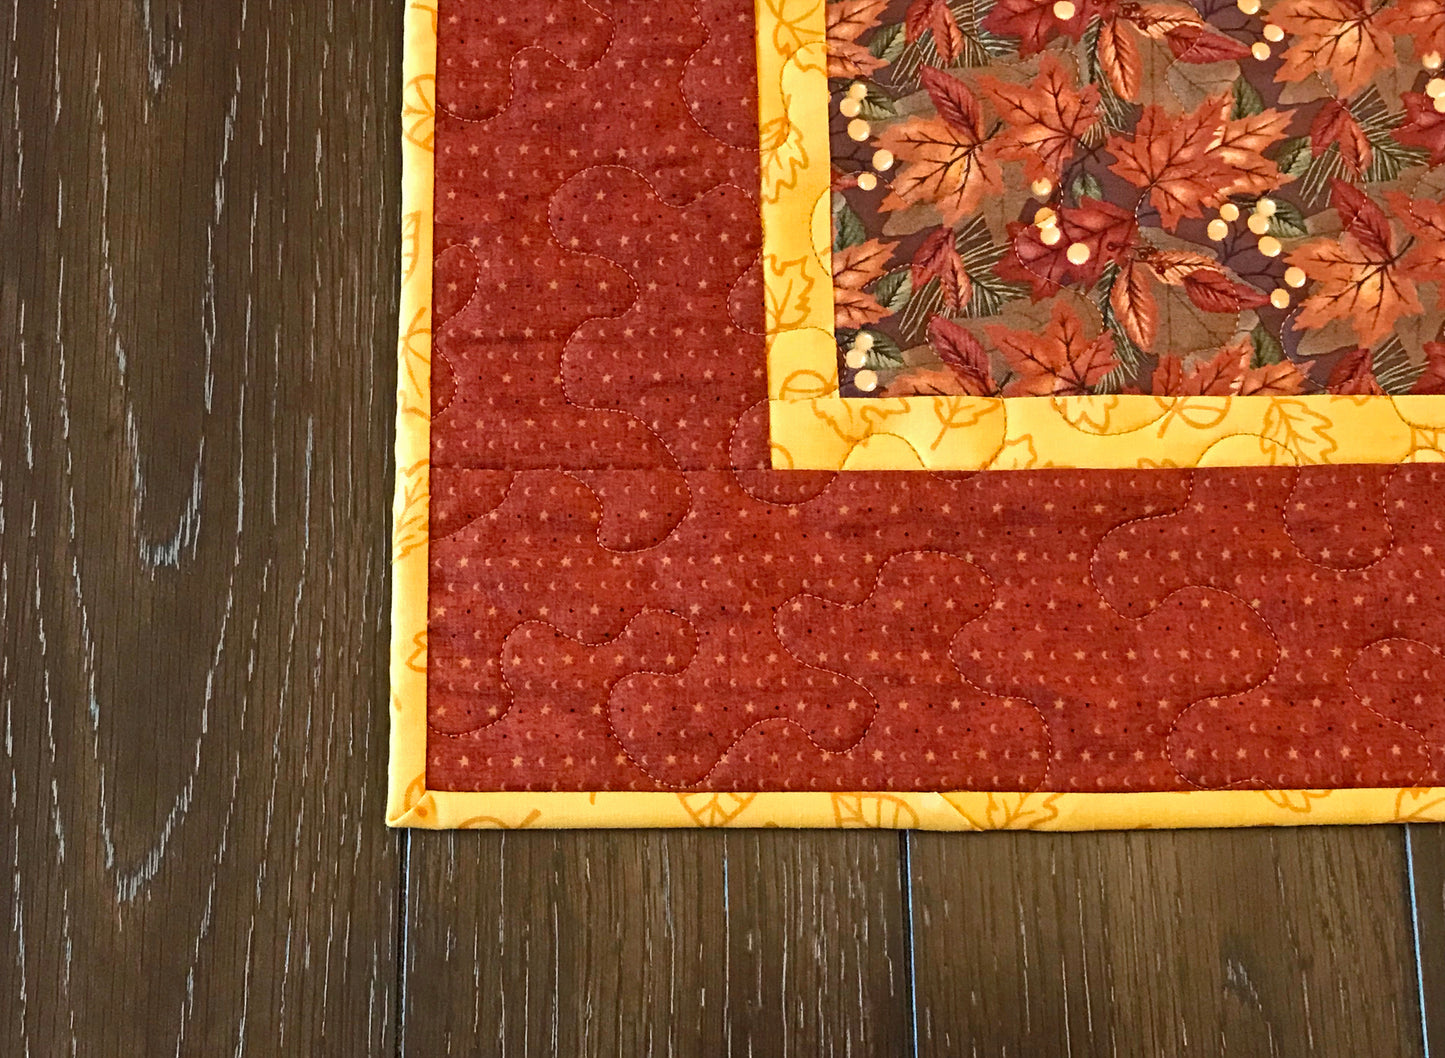 Fall or Autumn Leaves Table Runner - Handmade Quilts, Digital Patterns, and Home Décor items online - Cuddle Cat Quiltworks